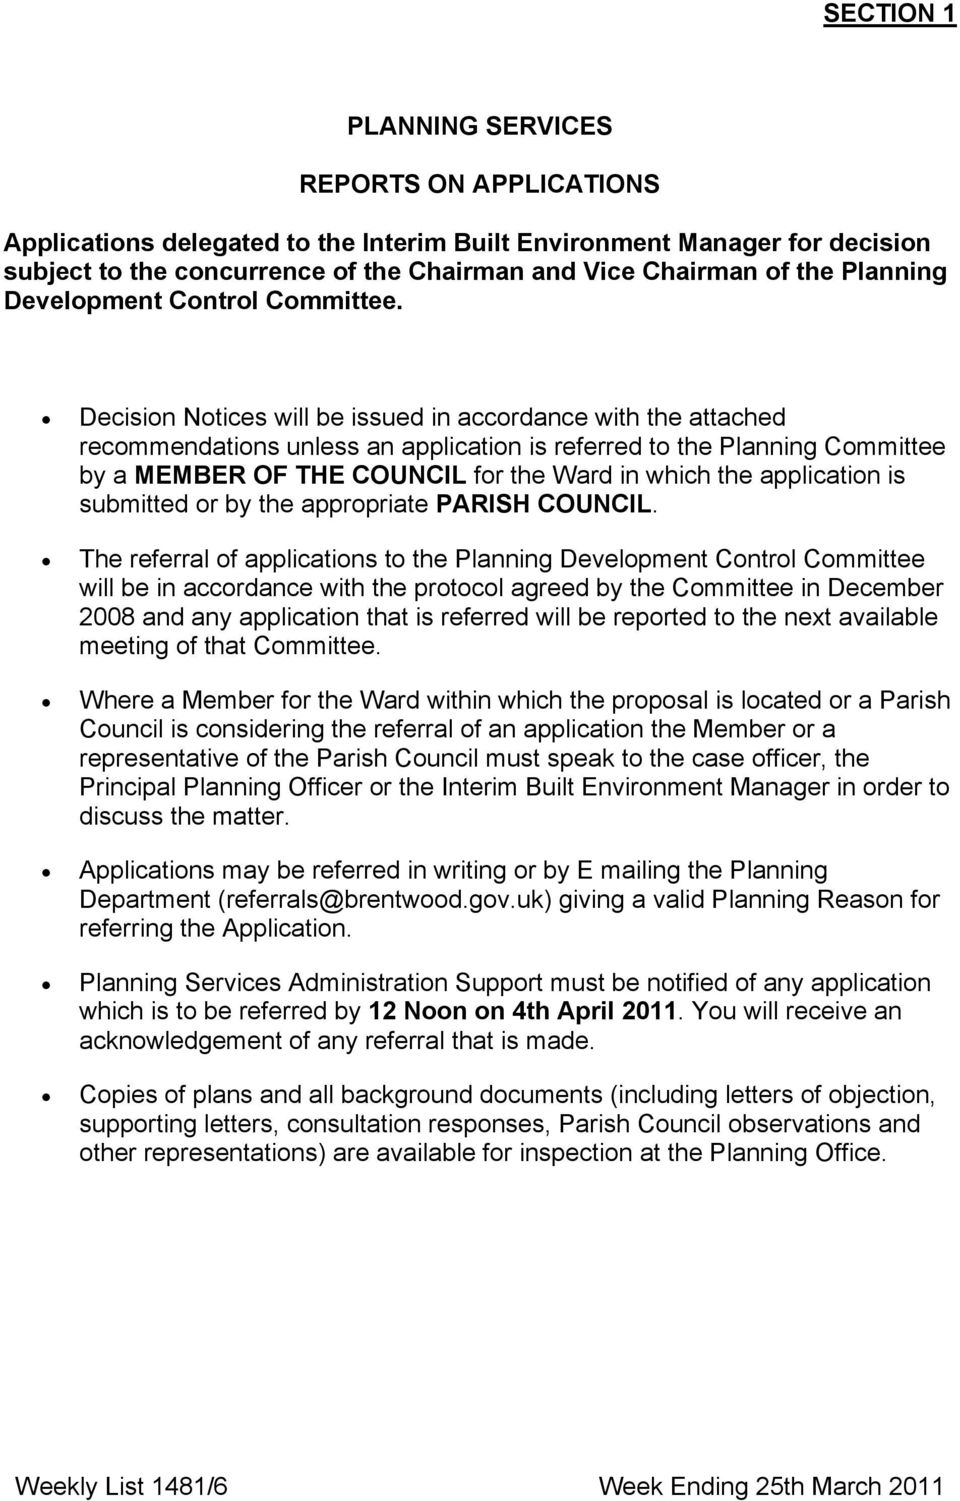 Decision Notices will be issued in accordance with the attached recommendations unless an application is referred to the Planning Committee by a ΜΕΜΒΕΡ ΟΦ ΤΗΕ ΧΟΥΝΧΙΛ for the Ward in which the